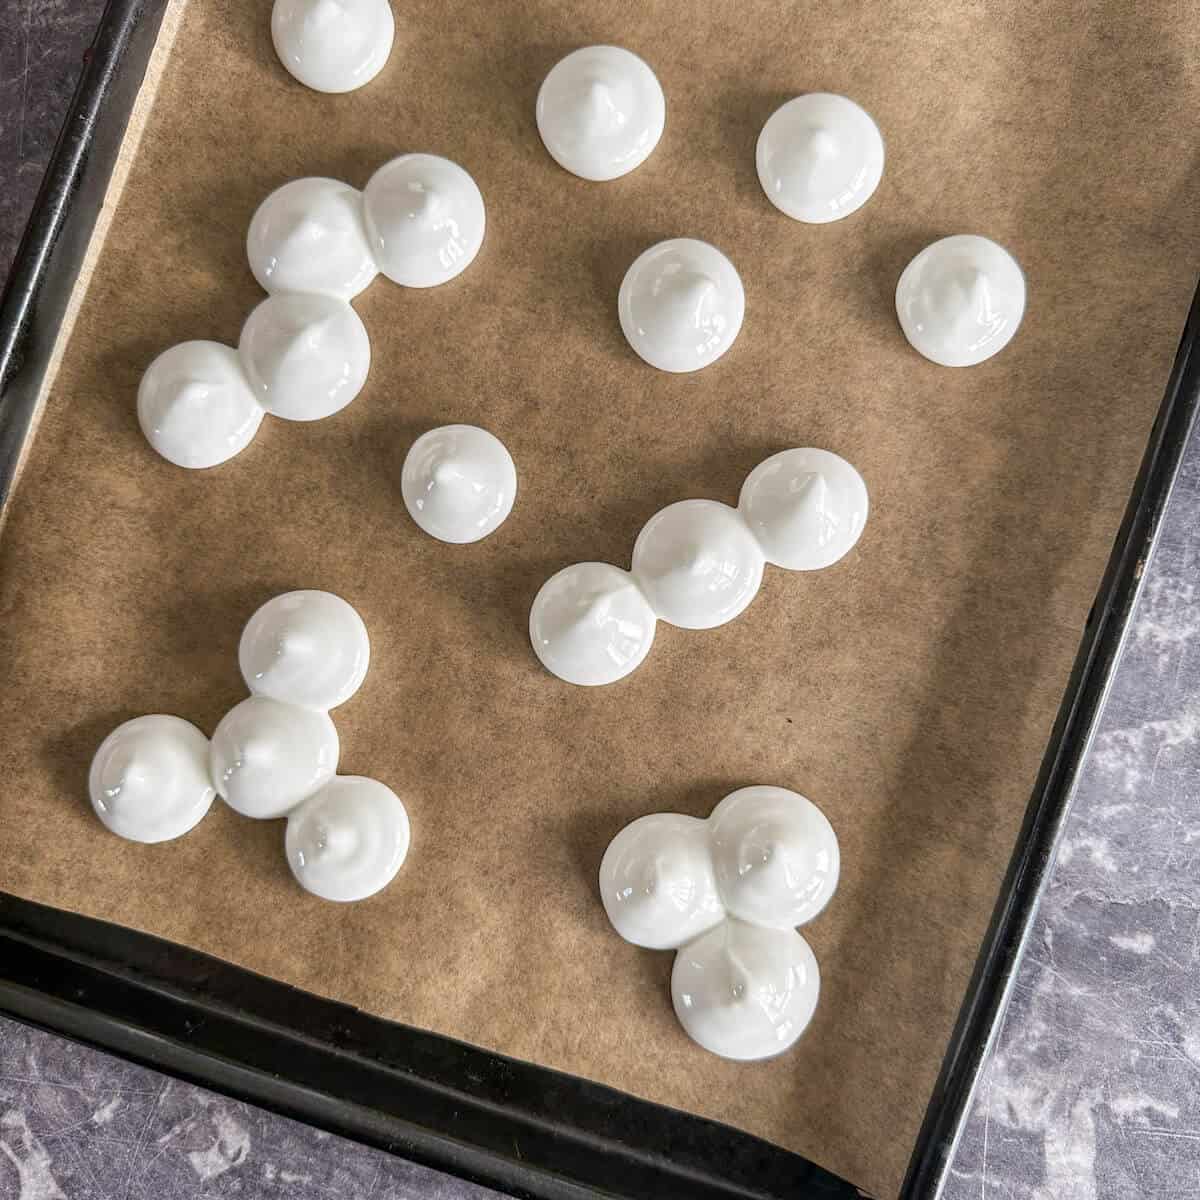 Piped meringue on a lined baking tray. 